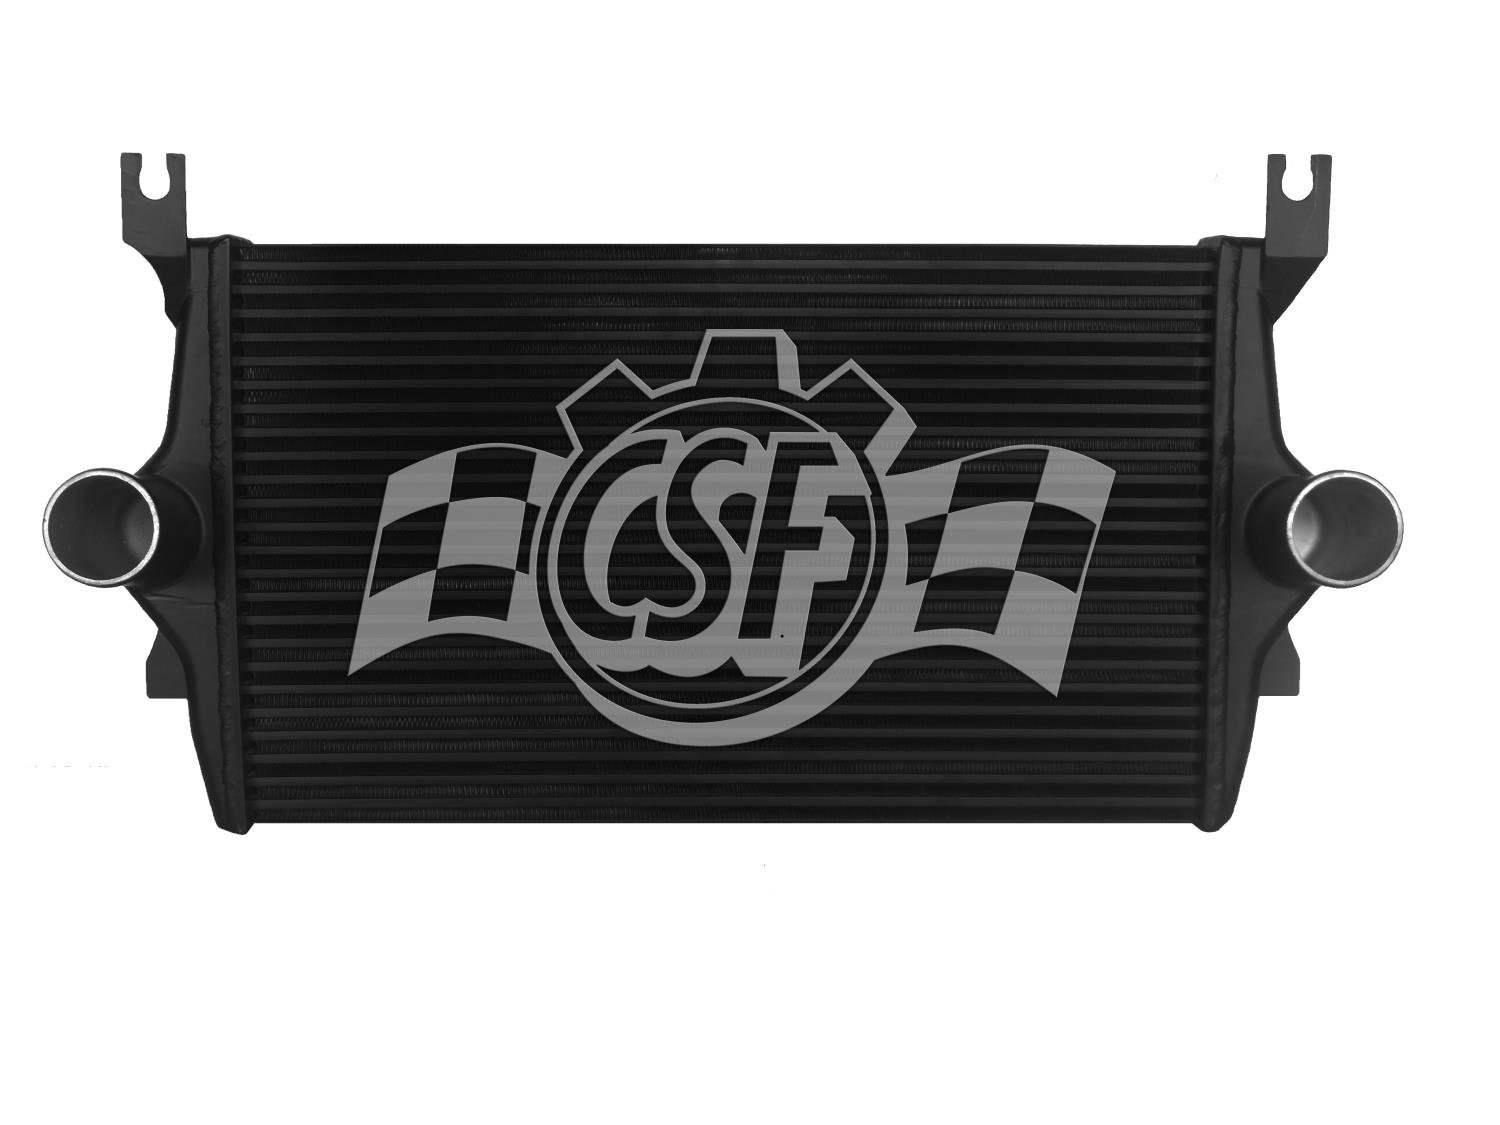 OE-Style Intercooler, Ford F-350 Super Duty, Ford F-250 Super Duty, Ford Excursion